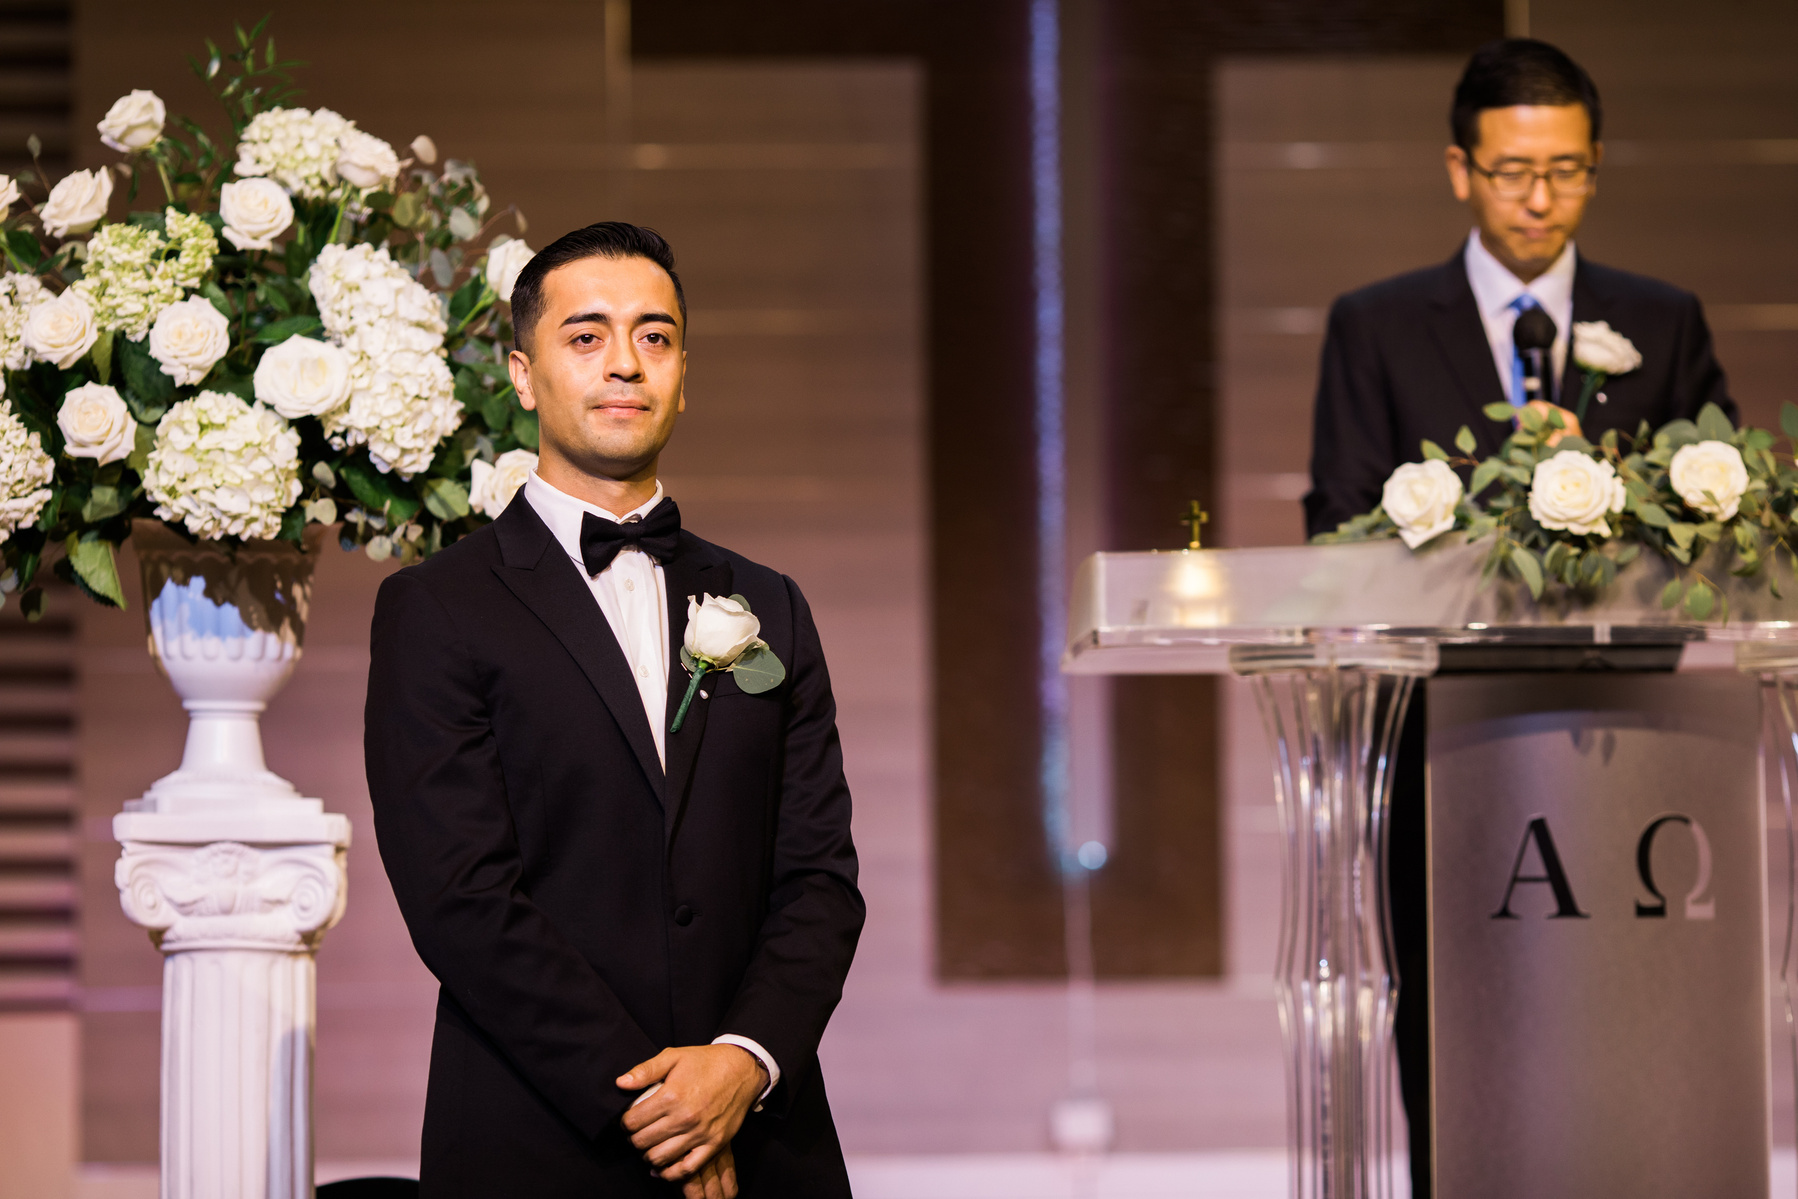 groom's reaction at the altar to seeing his bride for the first time in her wedding dress